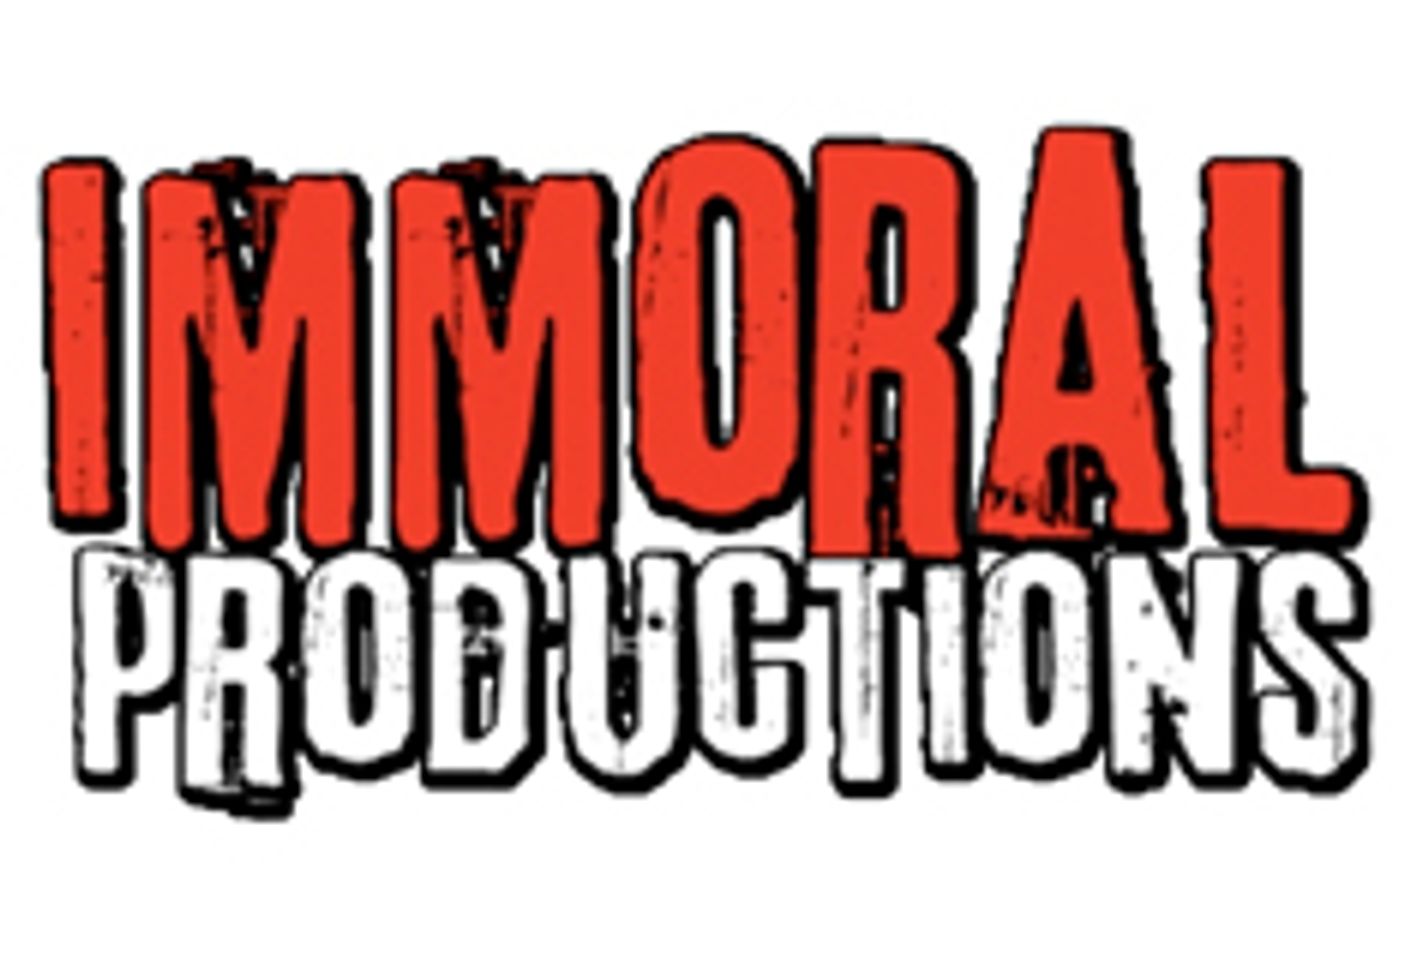 Immoral Productions Declares Amy Brooke Third Model of the Month